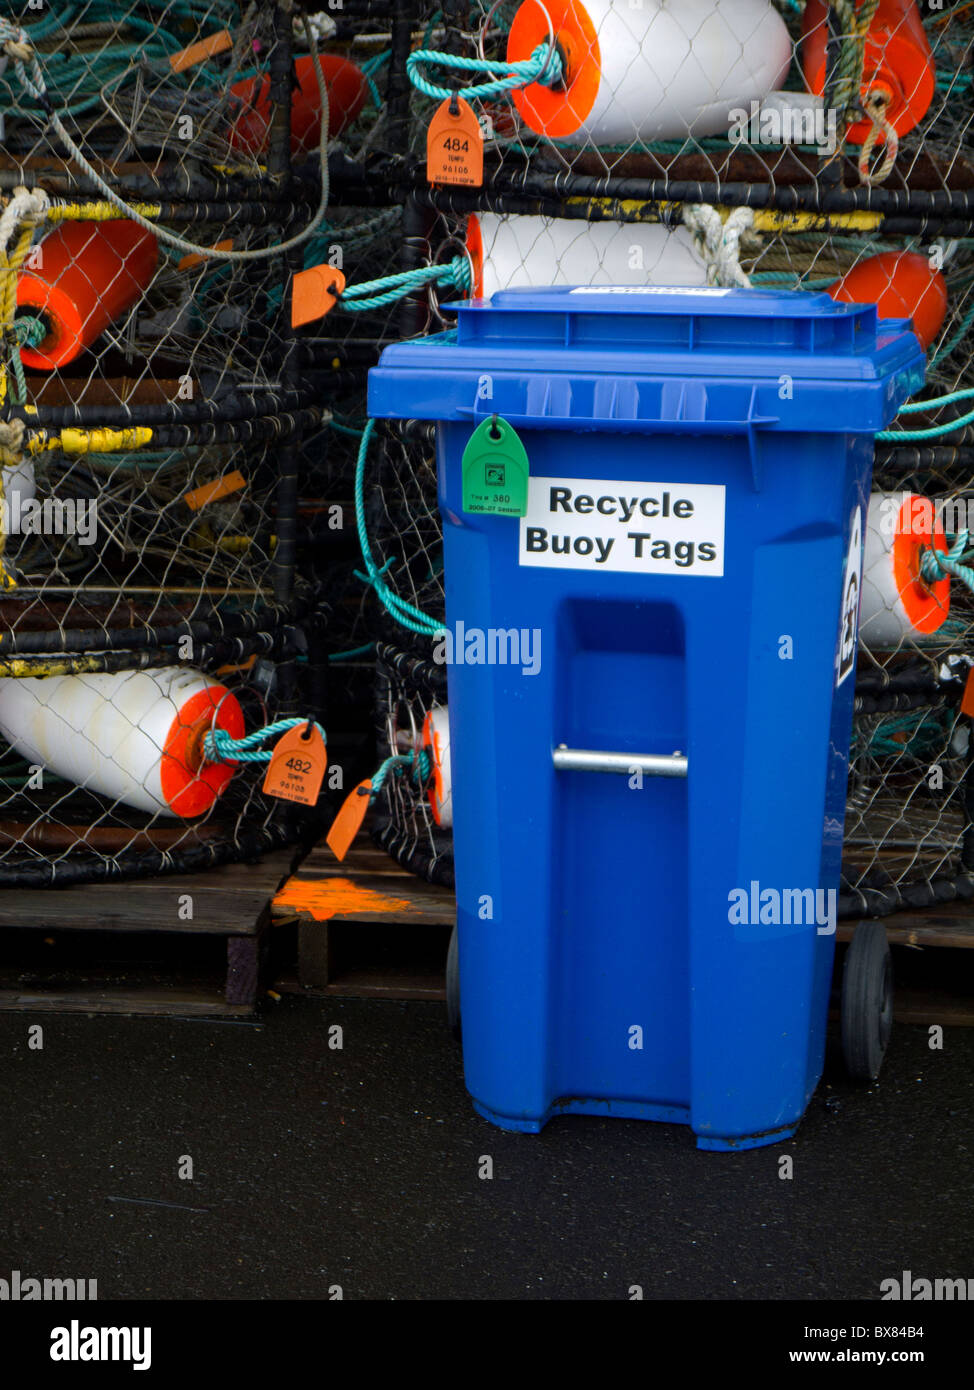 Plastic buoy tags need to be recycled each year at crabbing season. Stock Photo